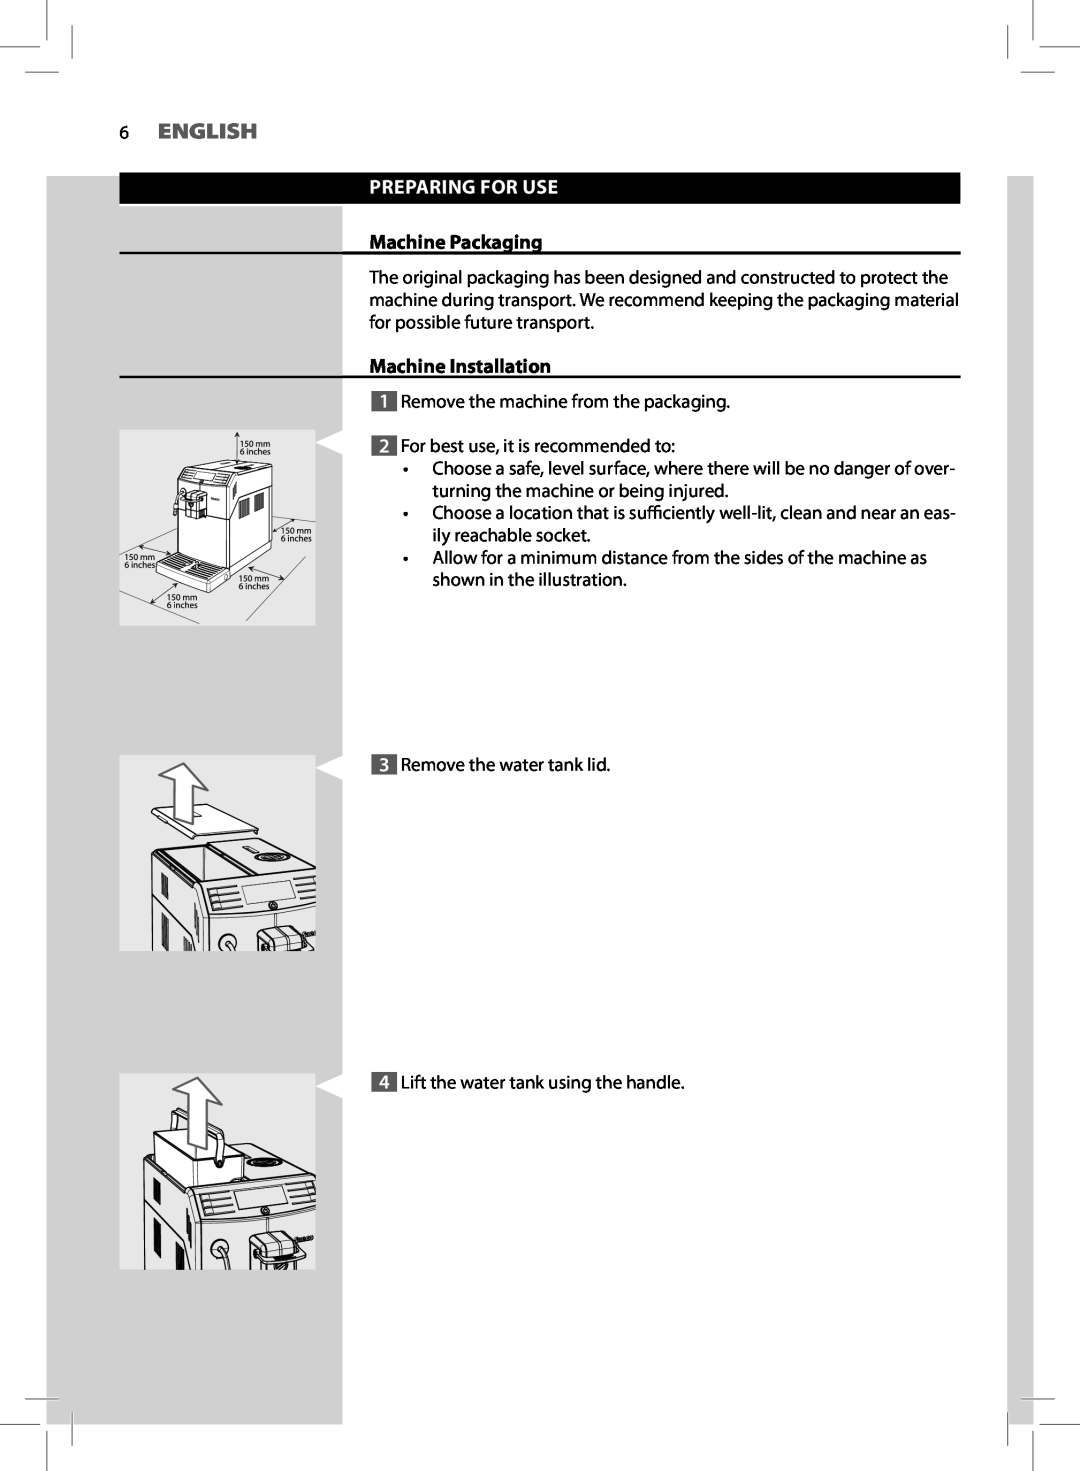 Saeco Coffee Makers HD8772 user manual English, Preparing For Use, Machine Packaging, Machine Installation 